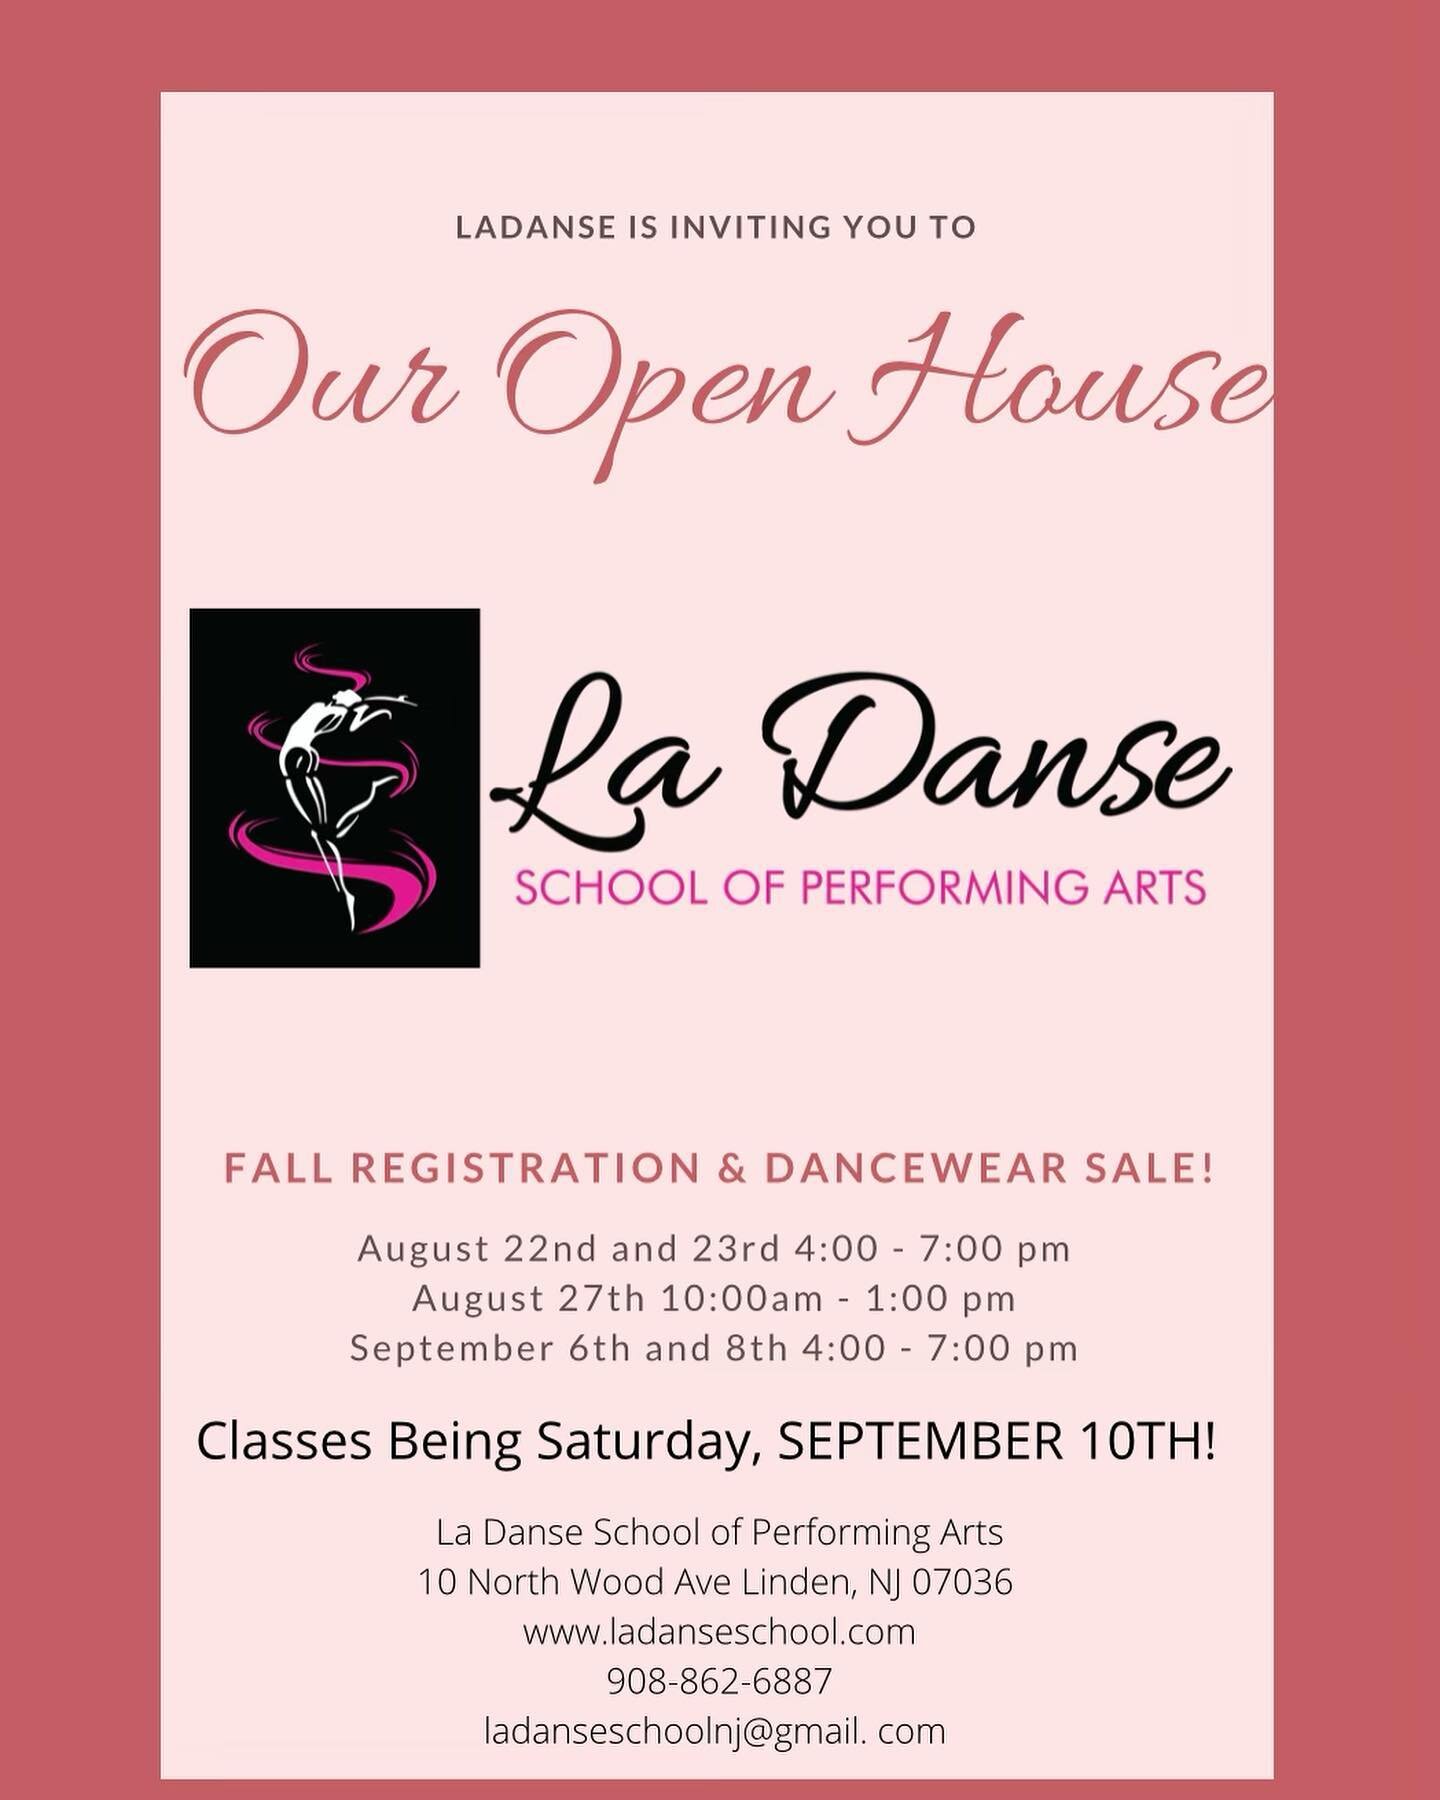 It&rsquo;s around that time!! Fall dance starts in about a month! Enroll now to get the best classes!! We also offer Zumba and an Inspire class!! Come to our open house to get some nice dance wear and to check all this out in person 😉🎉 See you ther